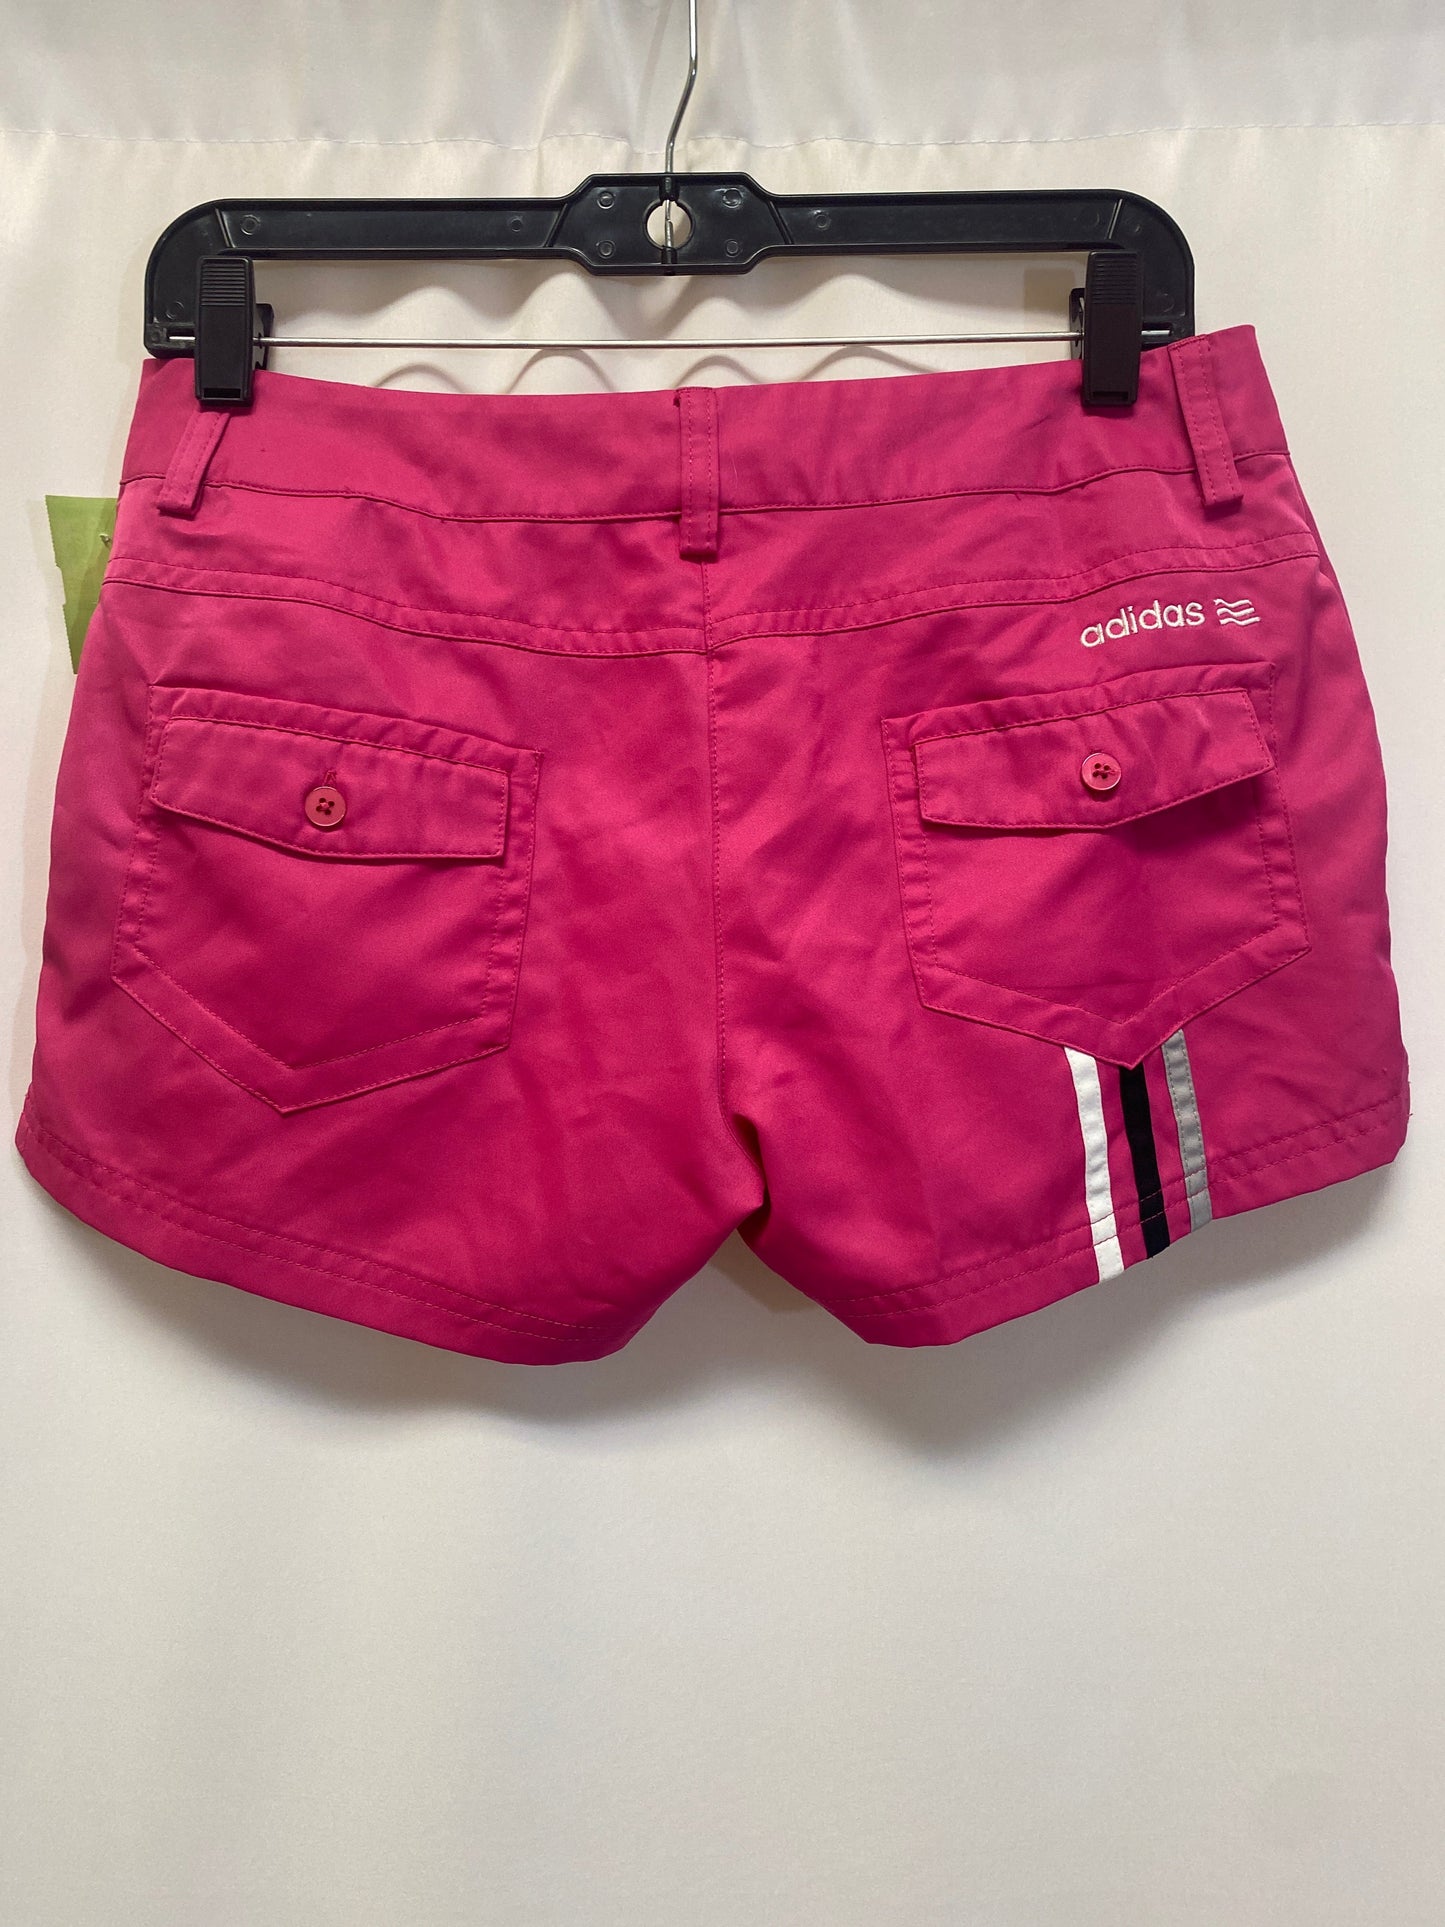 Shorts By Adidas  Size: 4